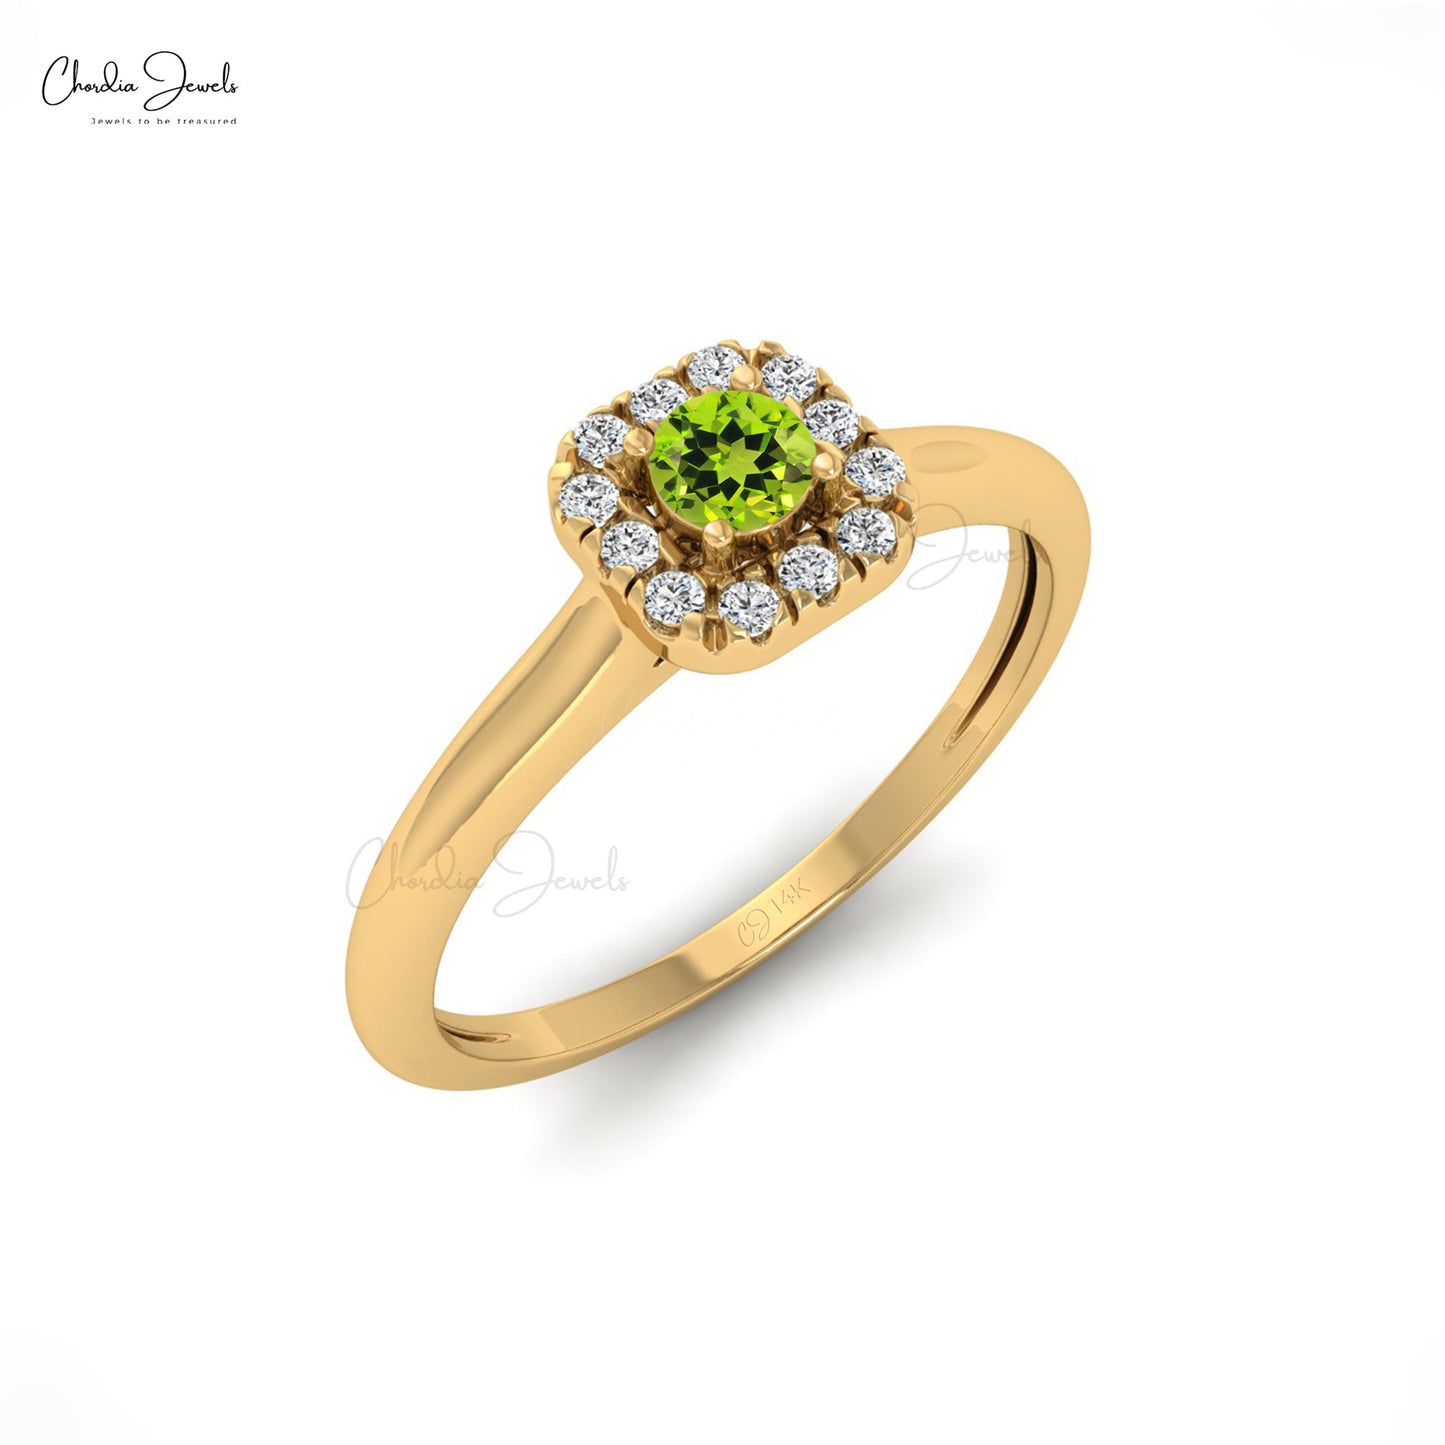 Natural 3mm Round Cut Sharing Prong Peridot and Diamond Halo Ring, 14k Solid Gold Gemstone Dainty Ring For Gift